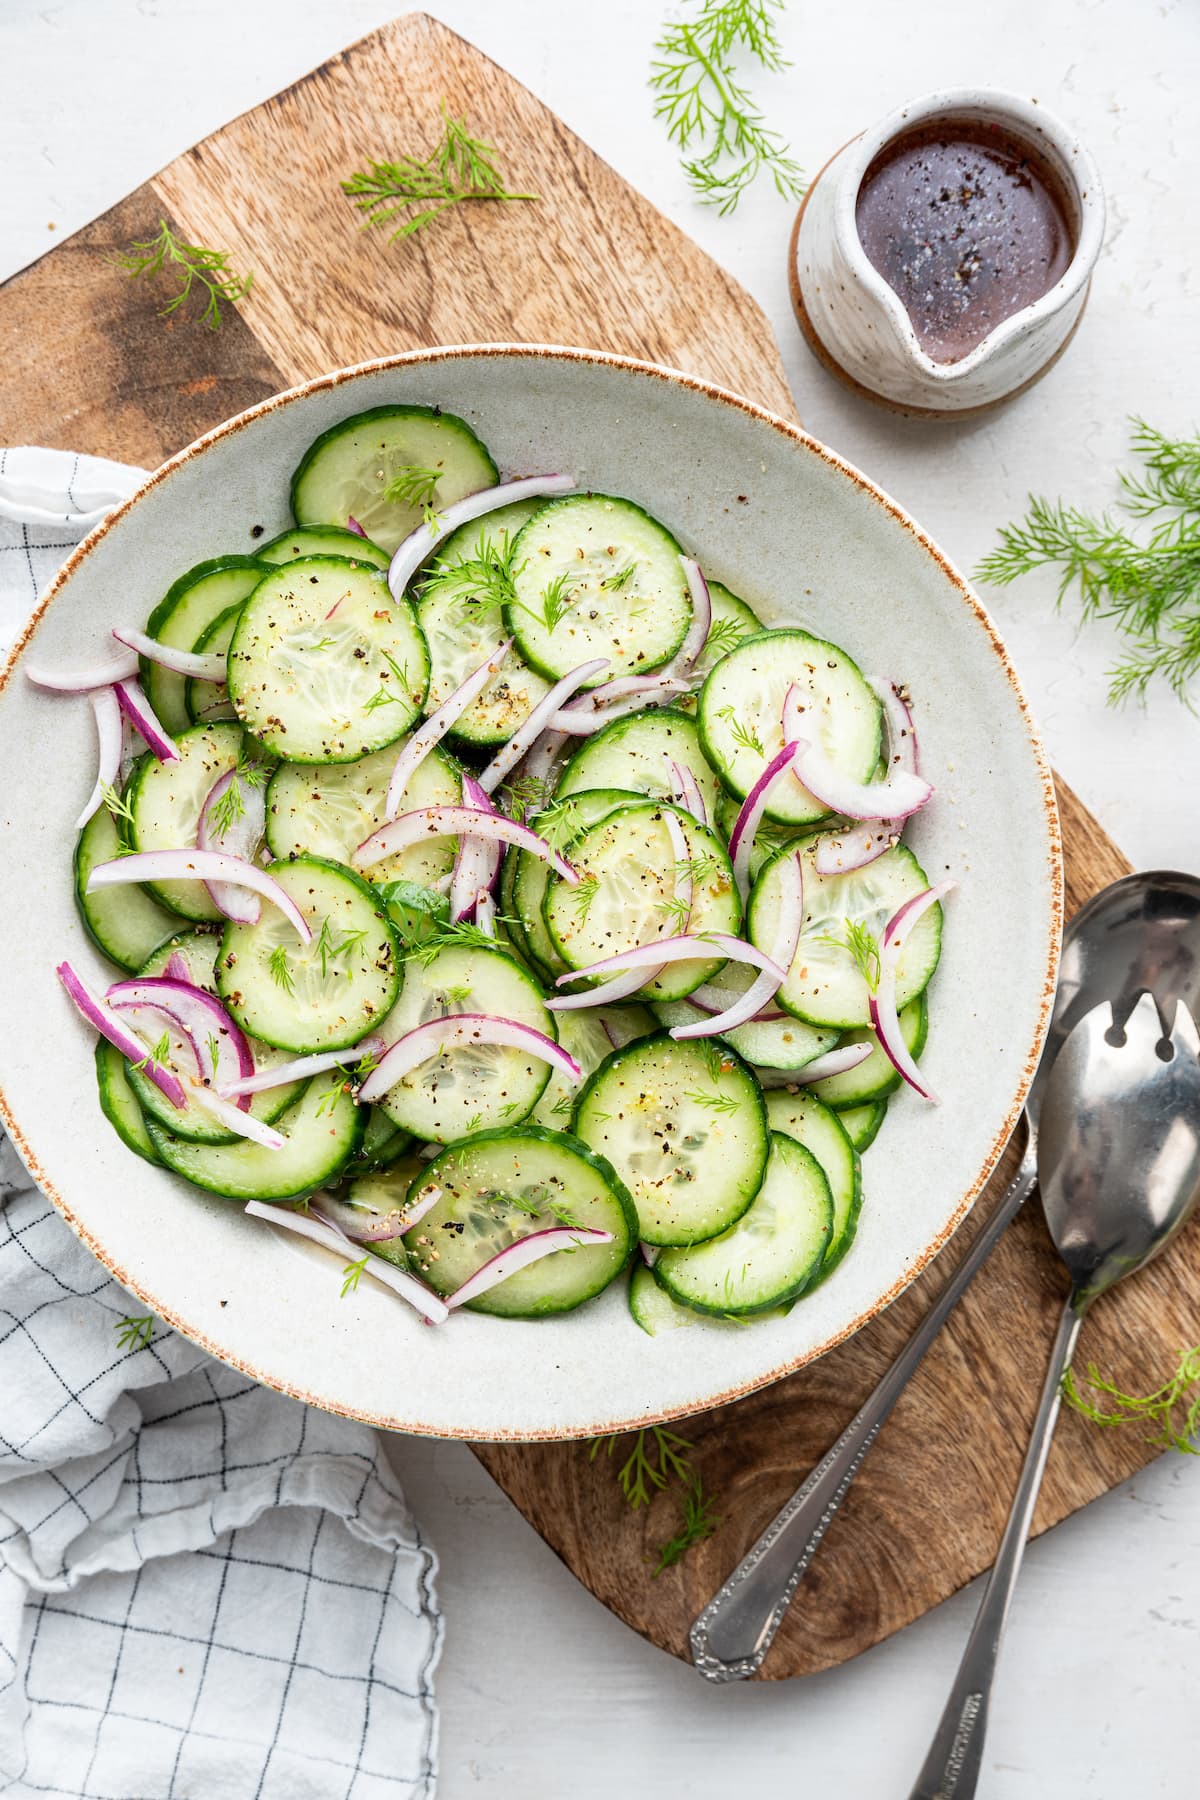 A cucumber salad in a large white bowl on a wooden cutting board.